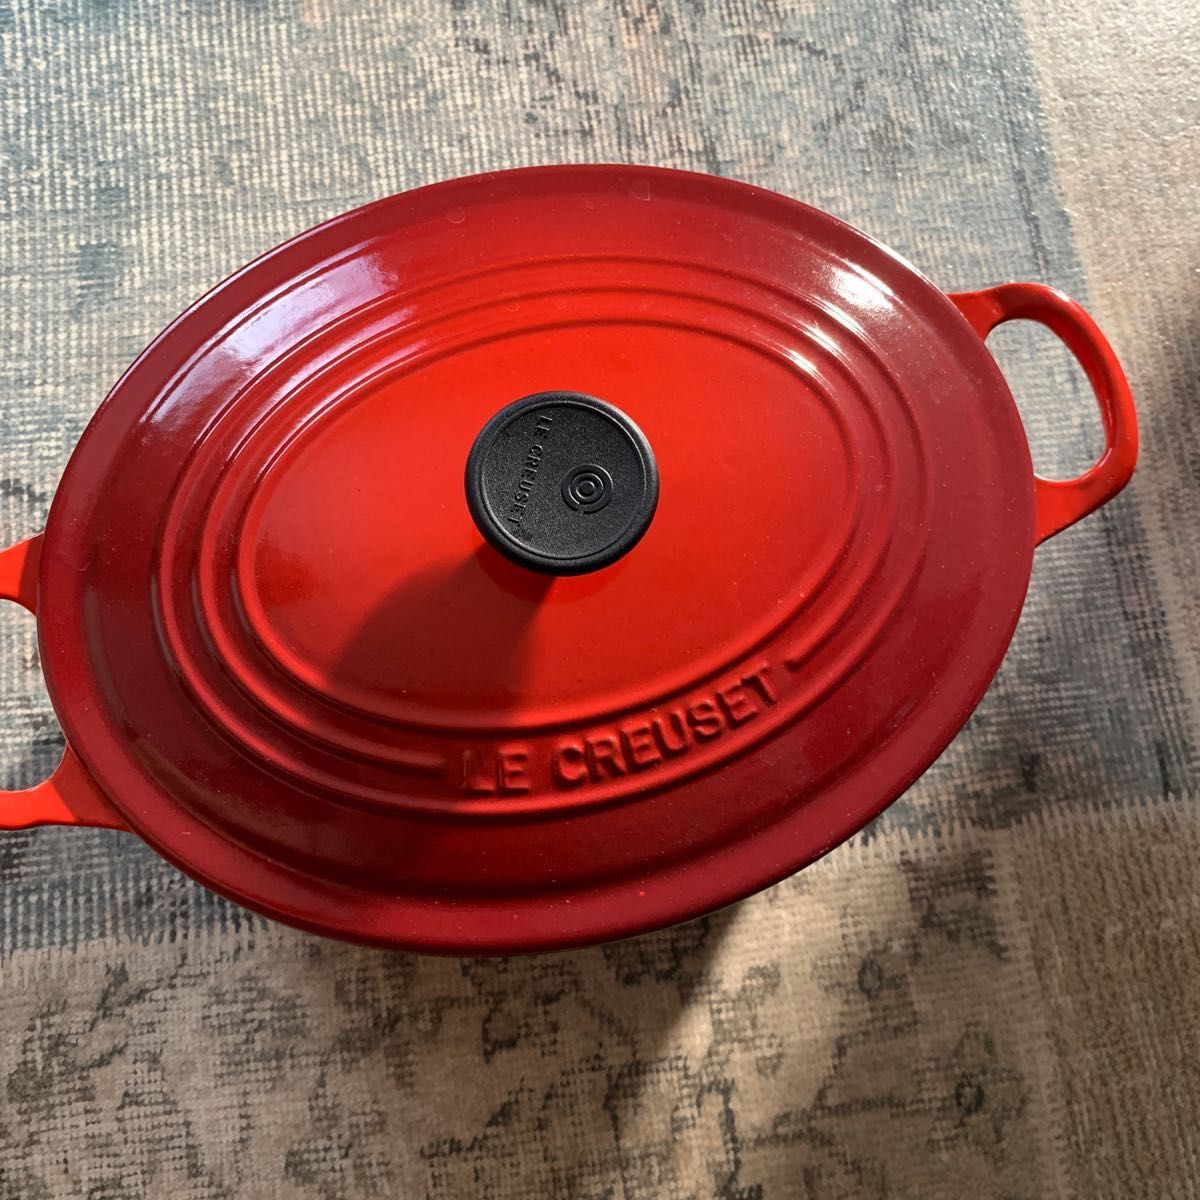 LE CREUSET ココット オーバル　 両手鍋 ル・クルーゼ チェリーレッド